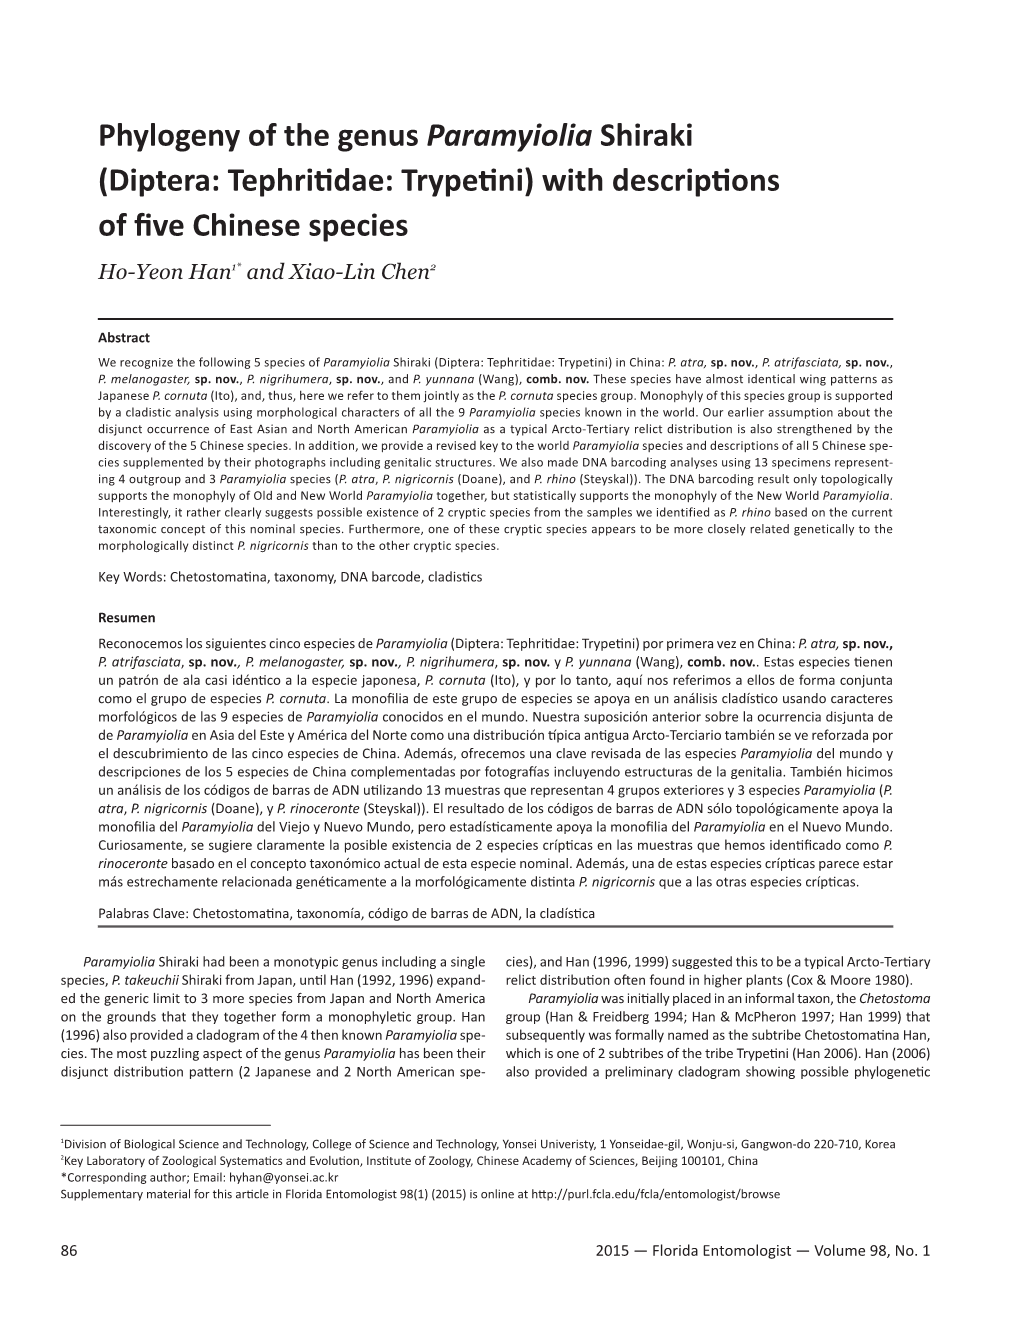 Diptera: Tephritidae: Trypetini) with Descriptions of Five Chinese Species Ho-Yeon Han1* and Xiao-Lin Chen2